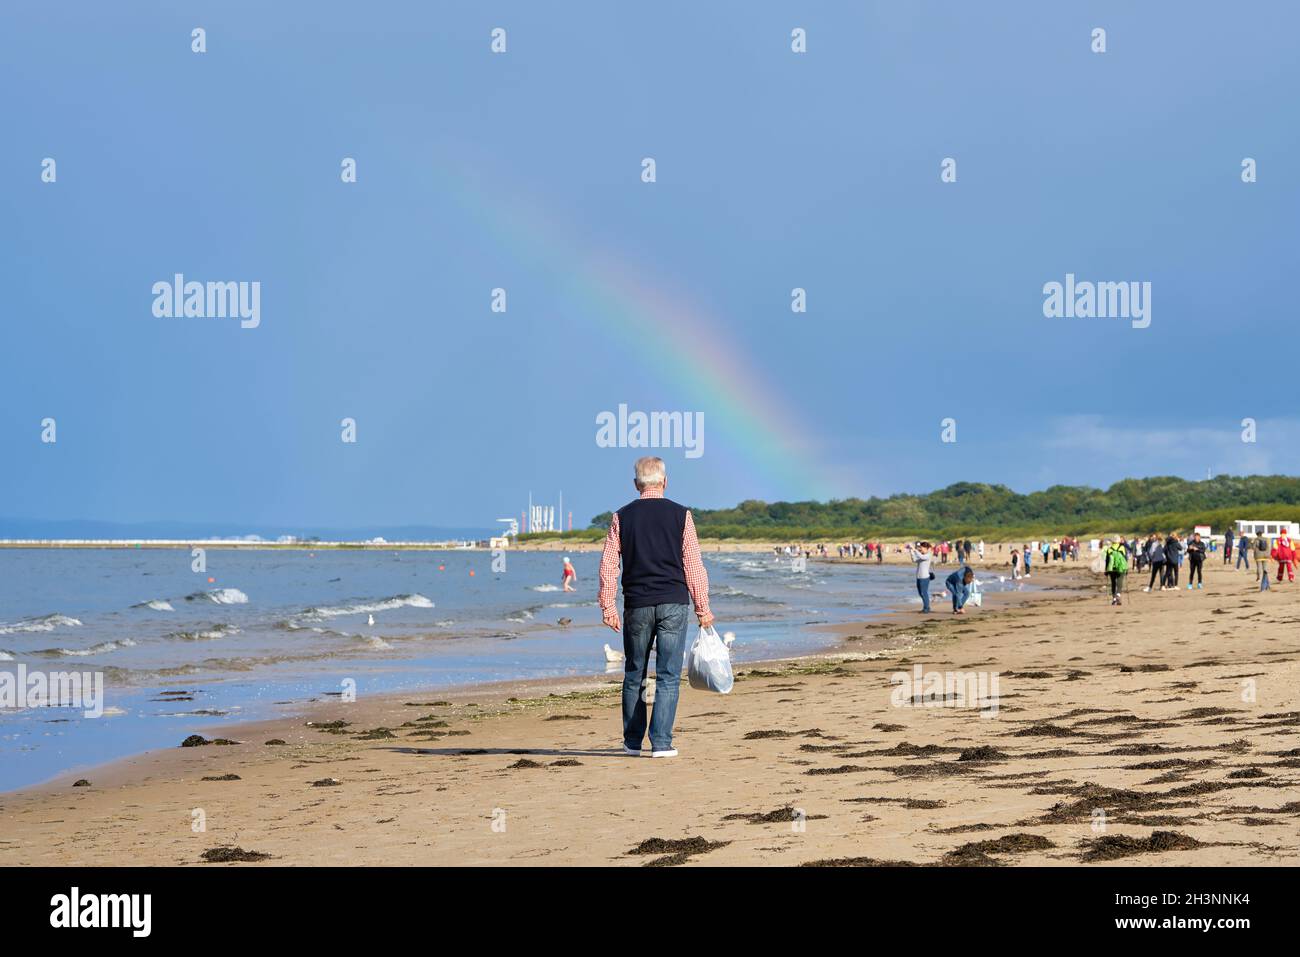 Holidaymakers on the beach of Swinoujscie on the Baltic Sea. In the background a rainbow. Stock Photo